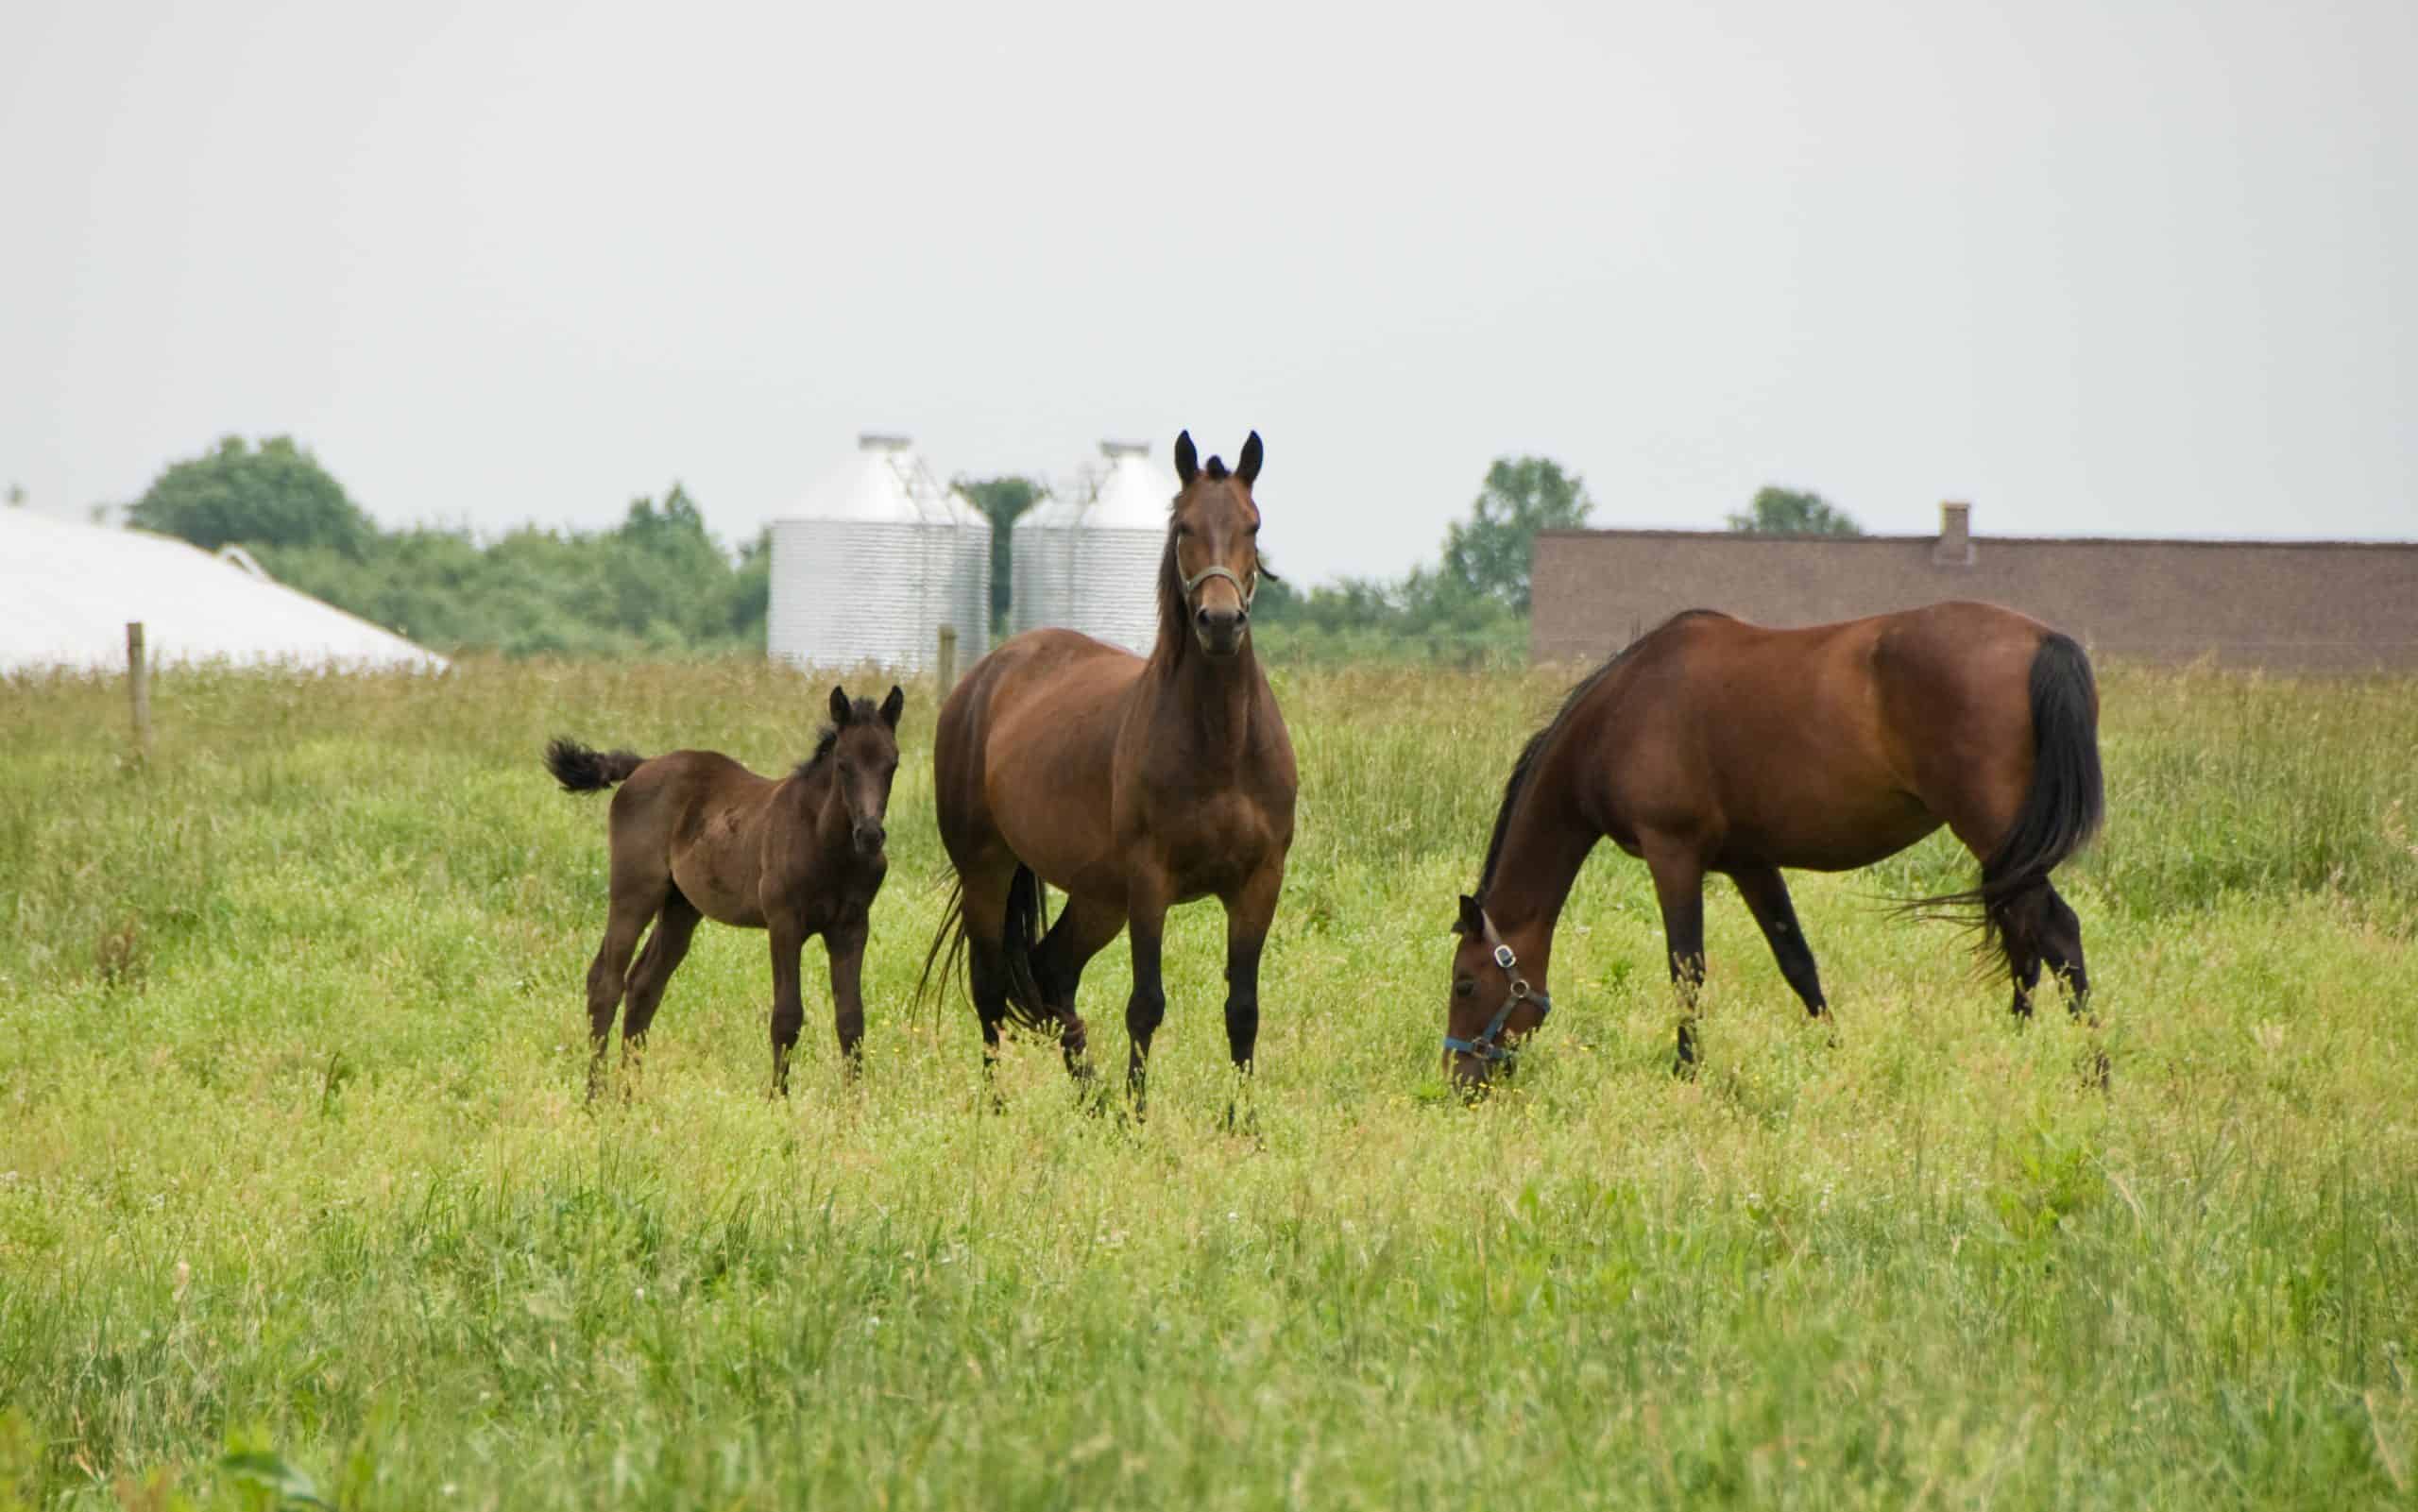 3 Morgan horses, including a mare and her colt, in a field